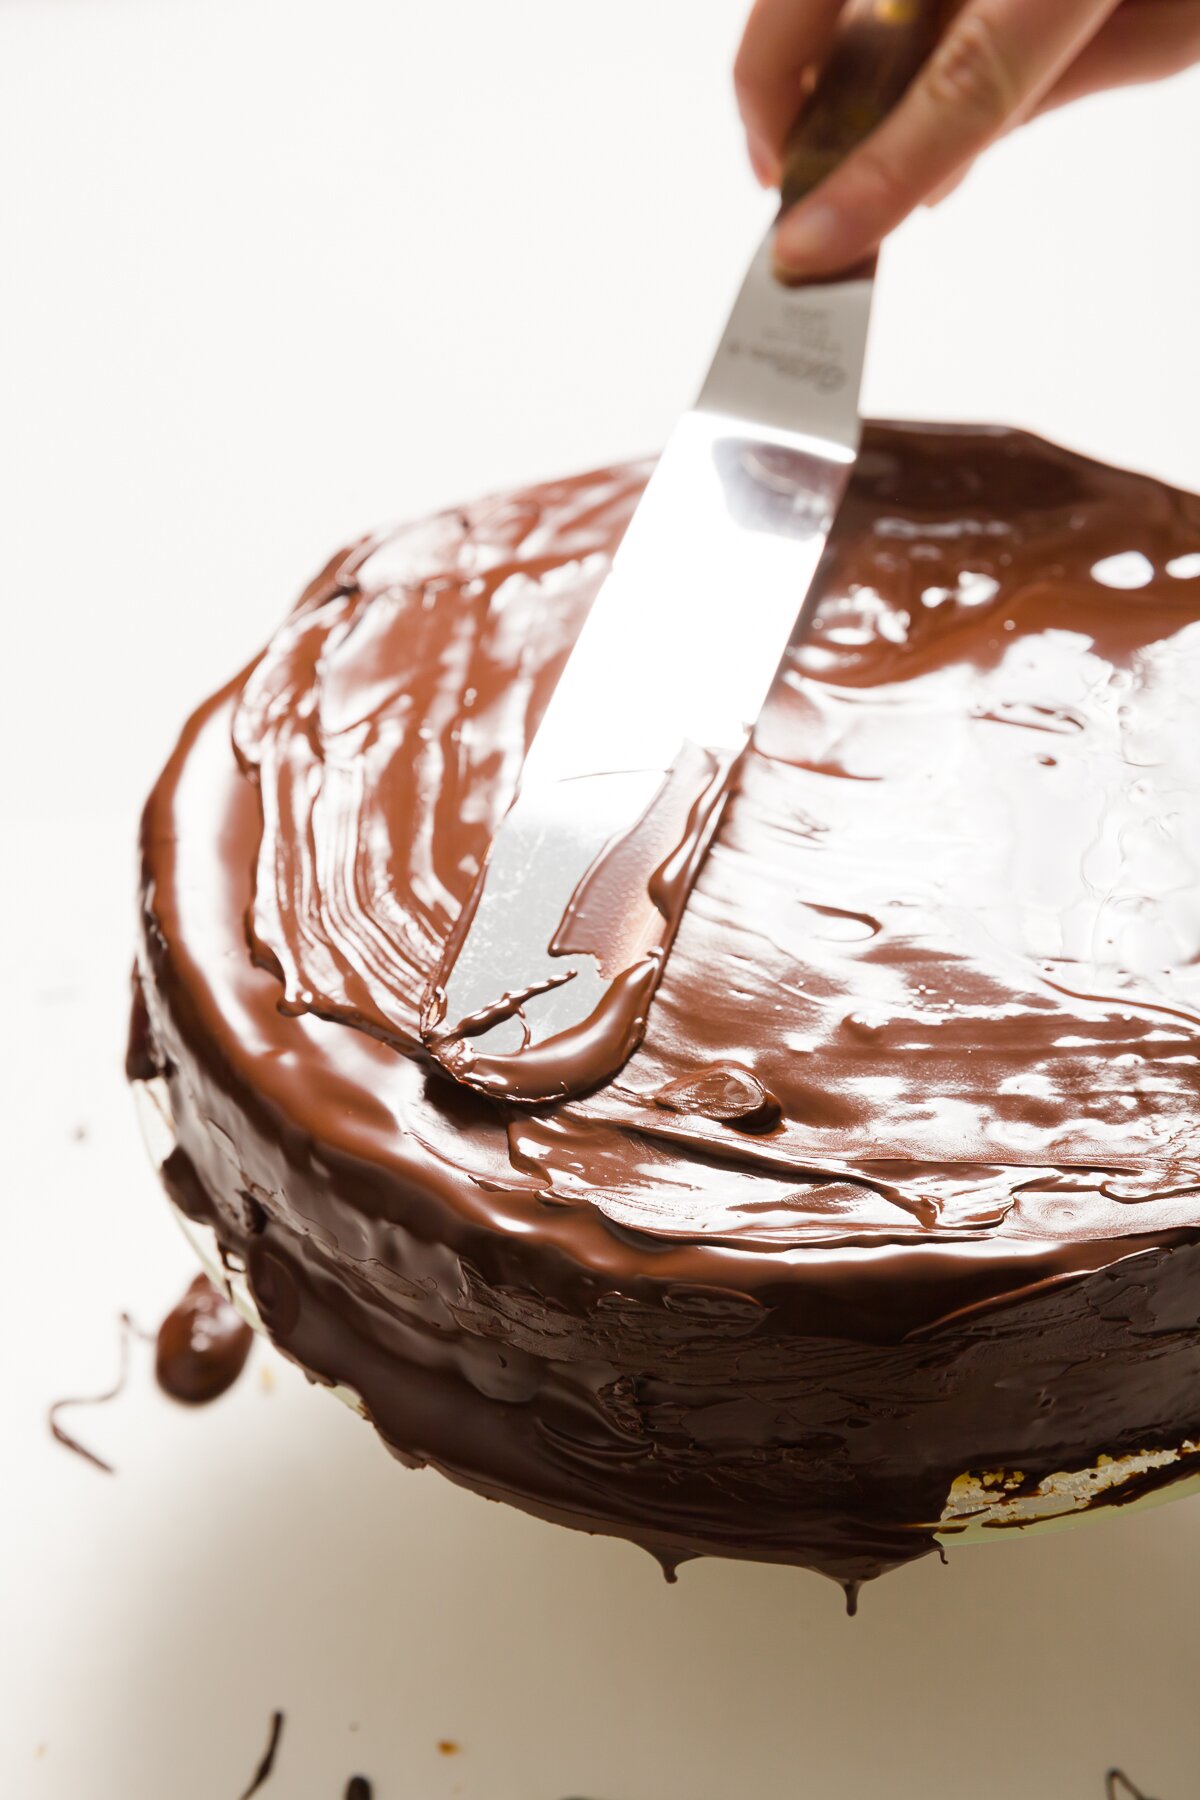 Smoothing out chocolate on top of a cake